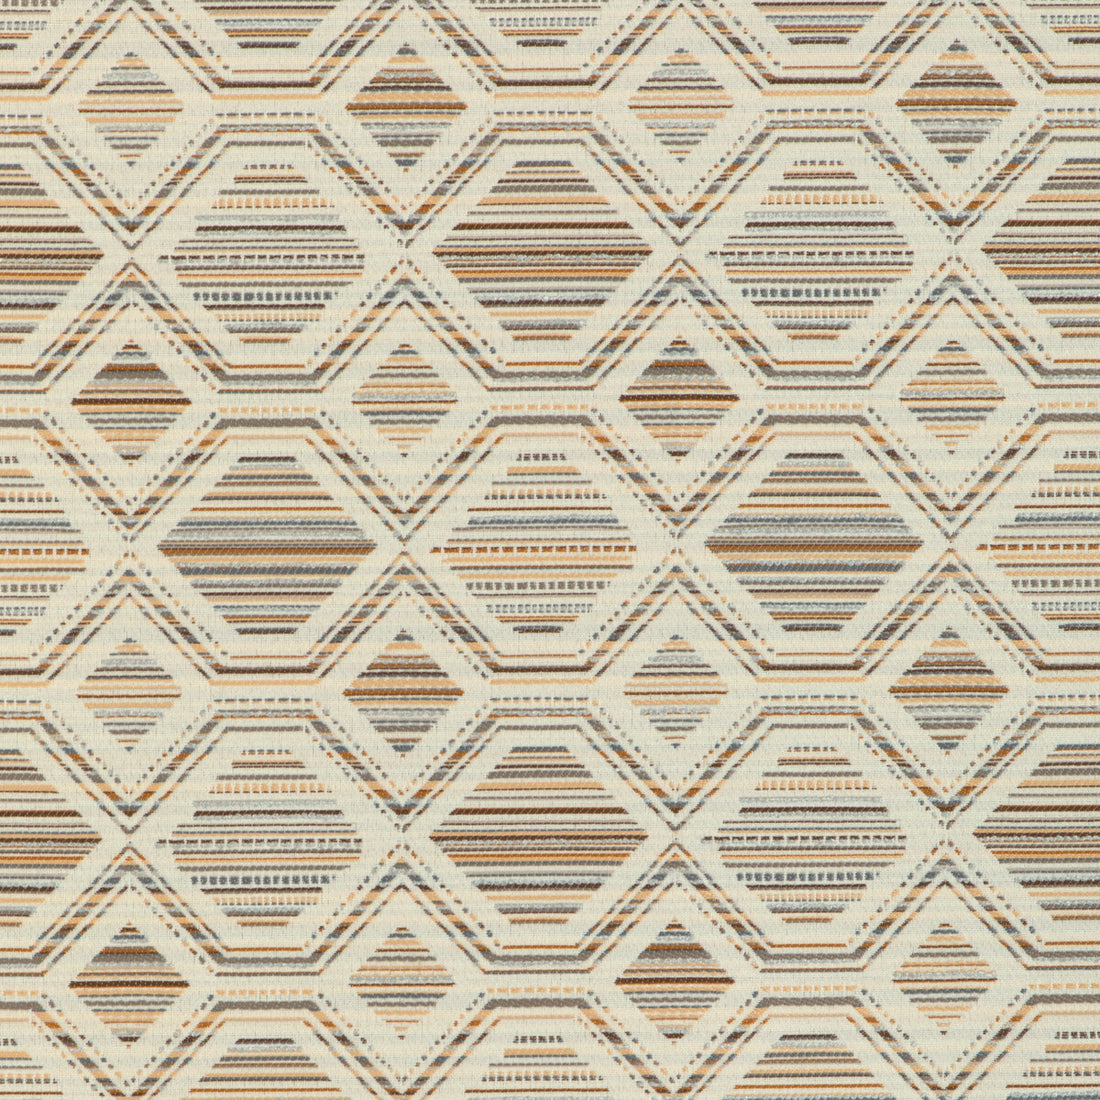 Northport fabric in driftwood color - pattern 37073.411.0 - by Kravet Contract in the Chesapeake collection